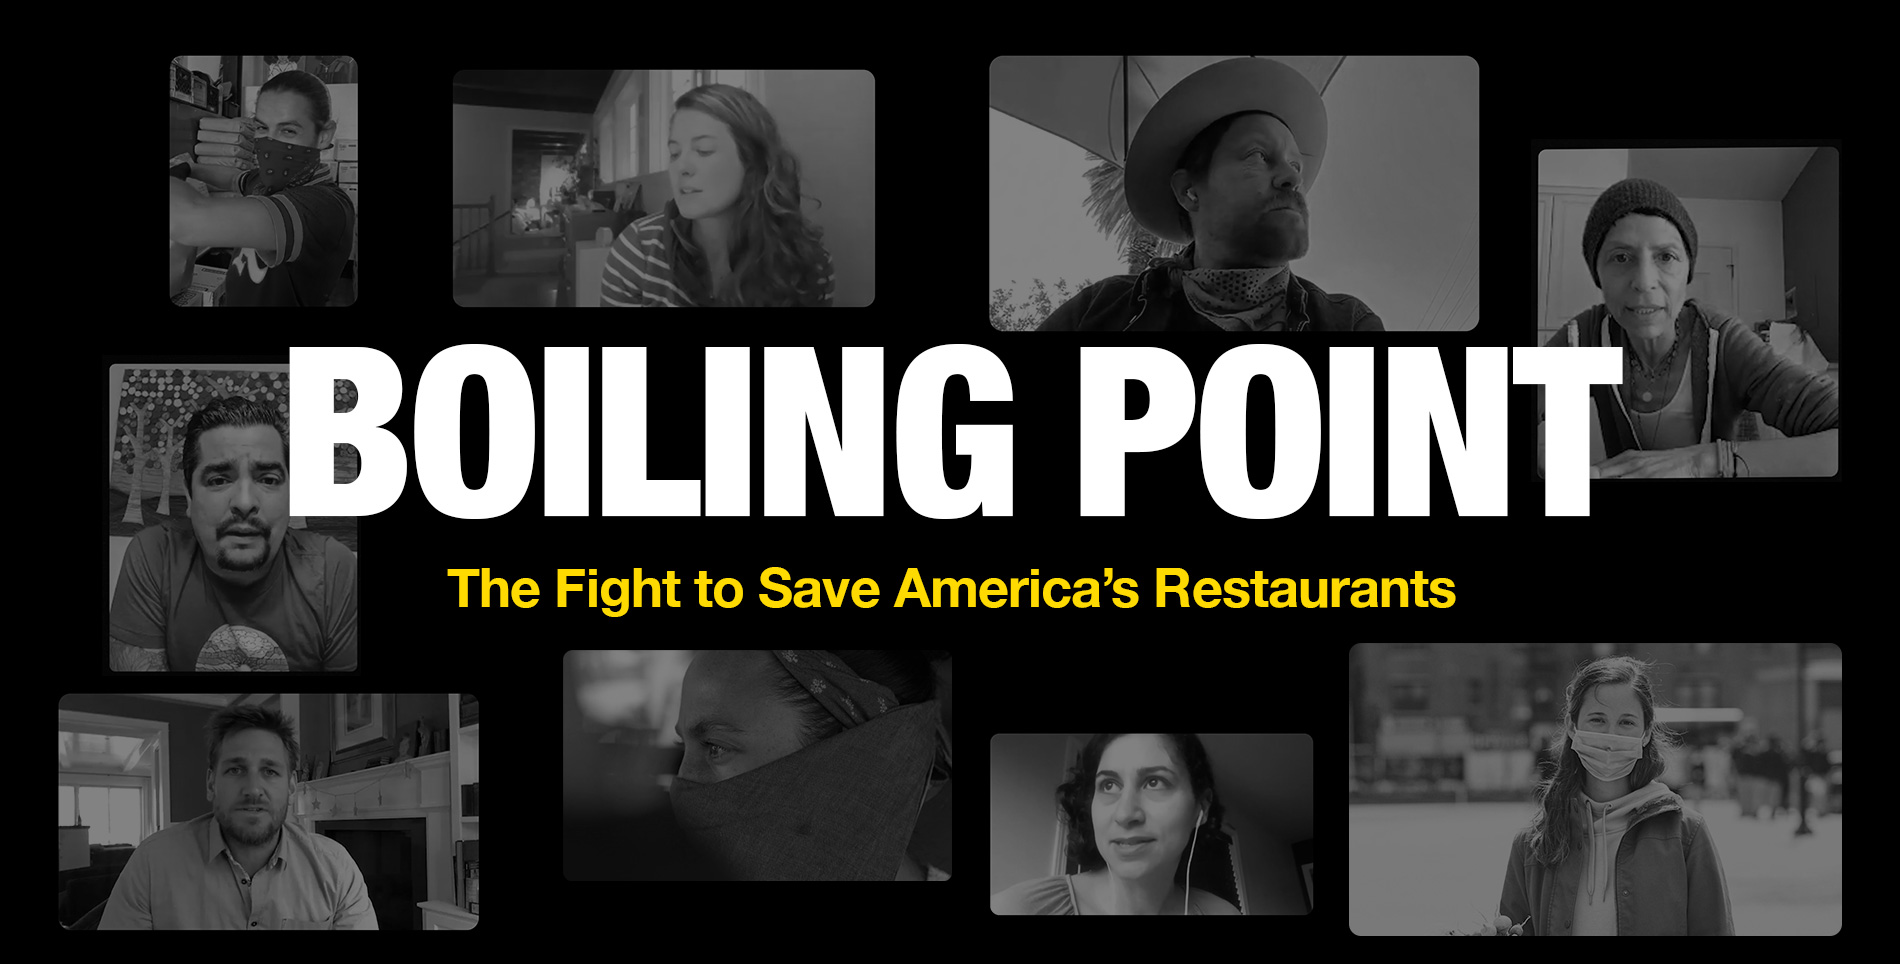 Boiling Point: The Fight to Save America’s Restaurants